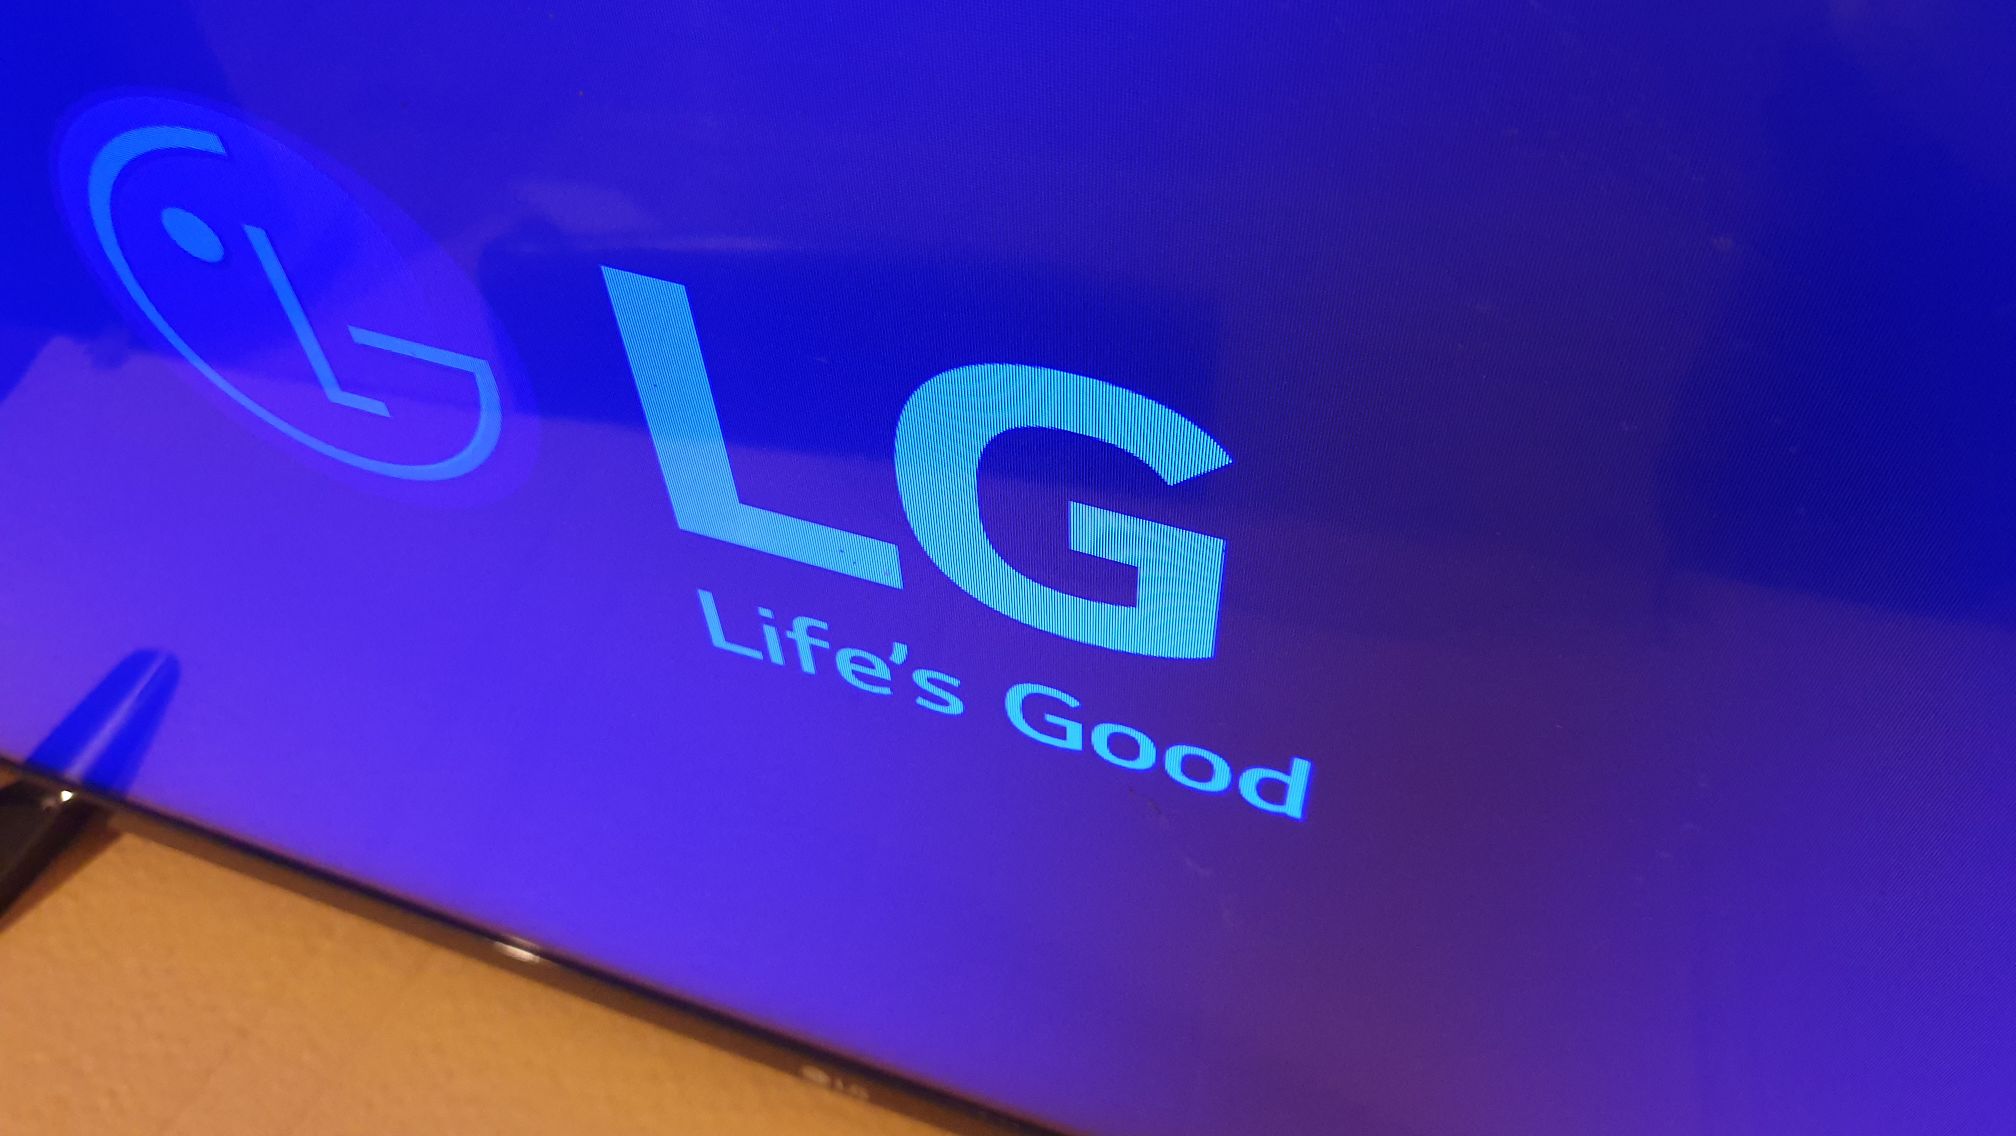 LG TV shows overall purple tint